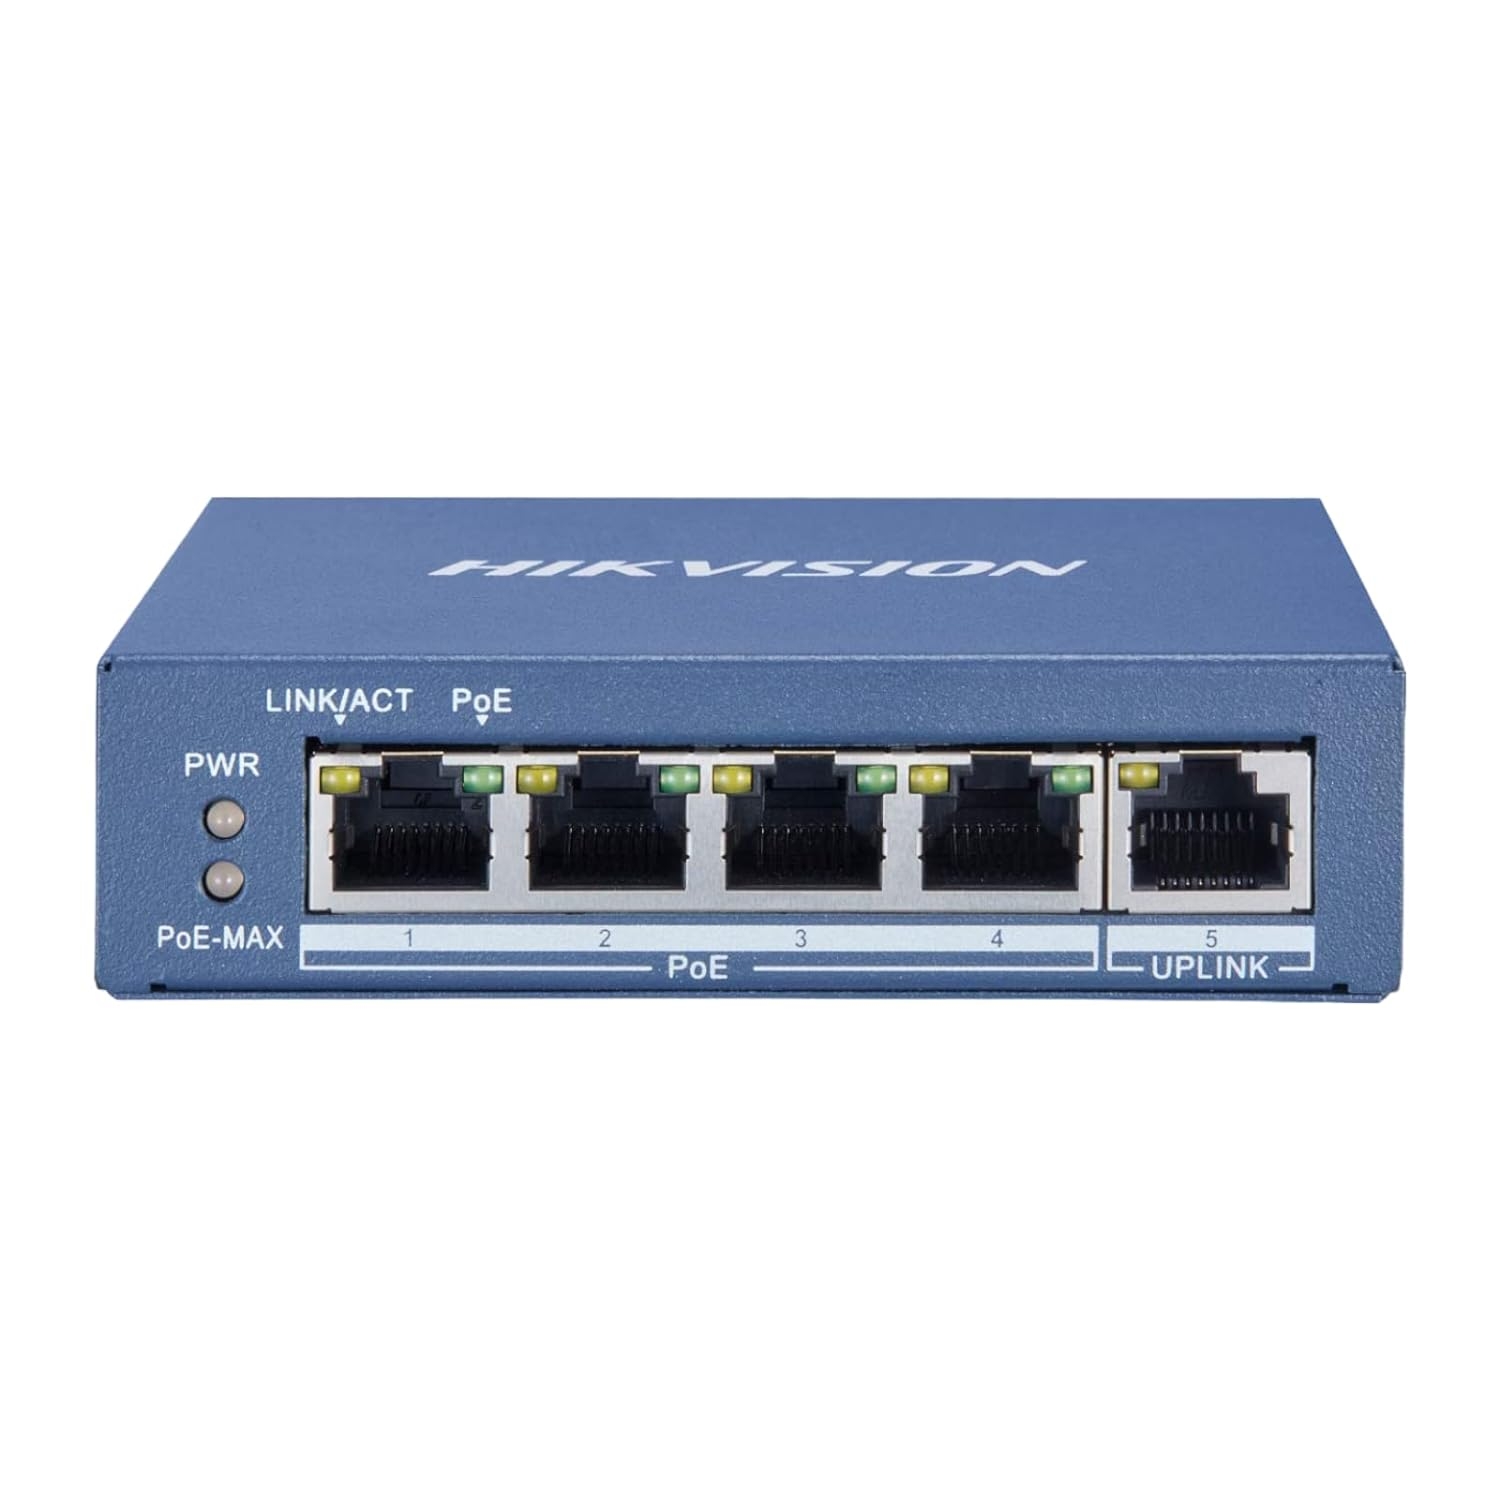 Hikvision 4 Port Gigabit Unmanaged POE Switch for IP CCTV Cameras DS-3E0505P-E/M with USEWELL RJ45